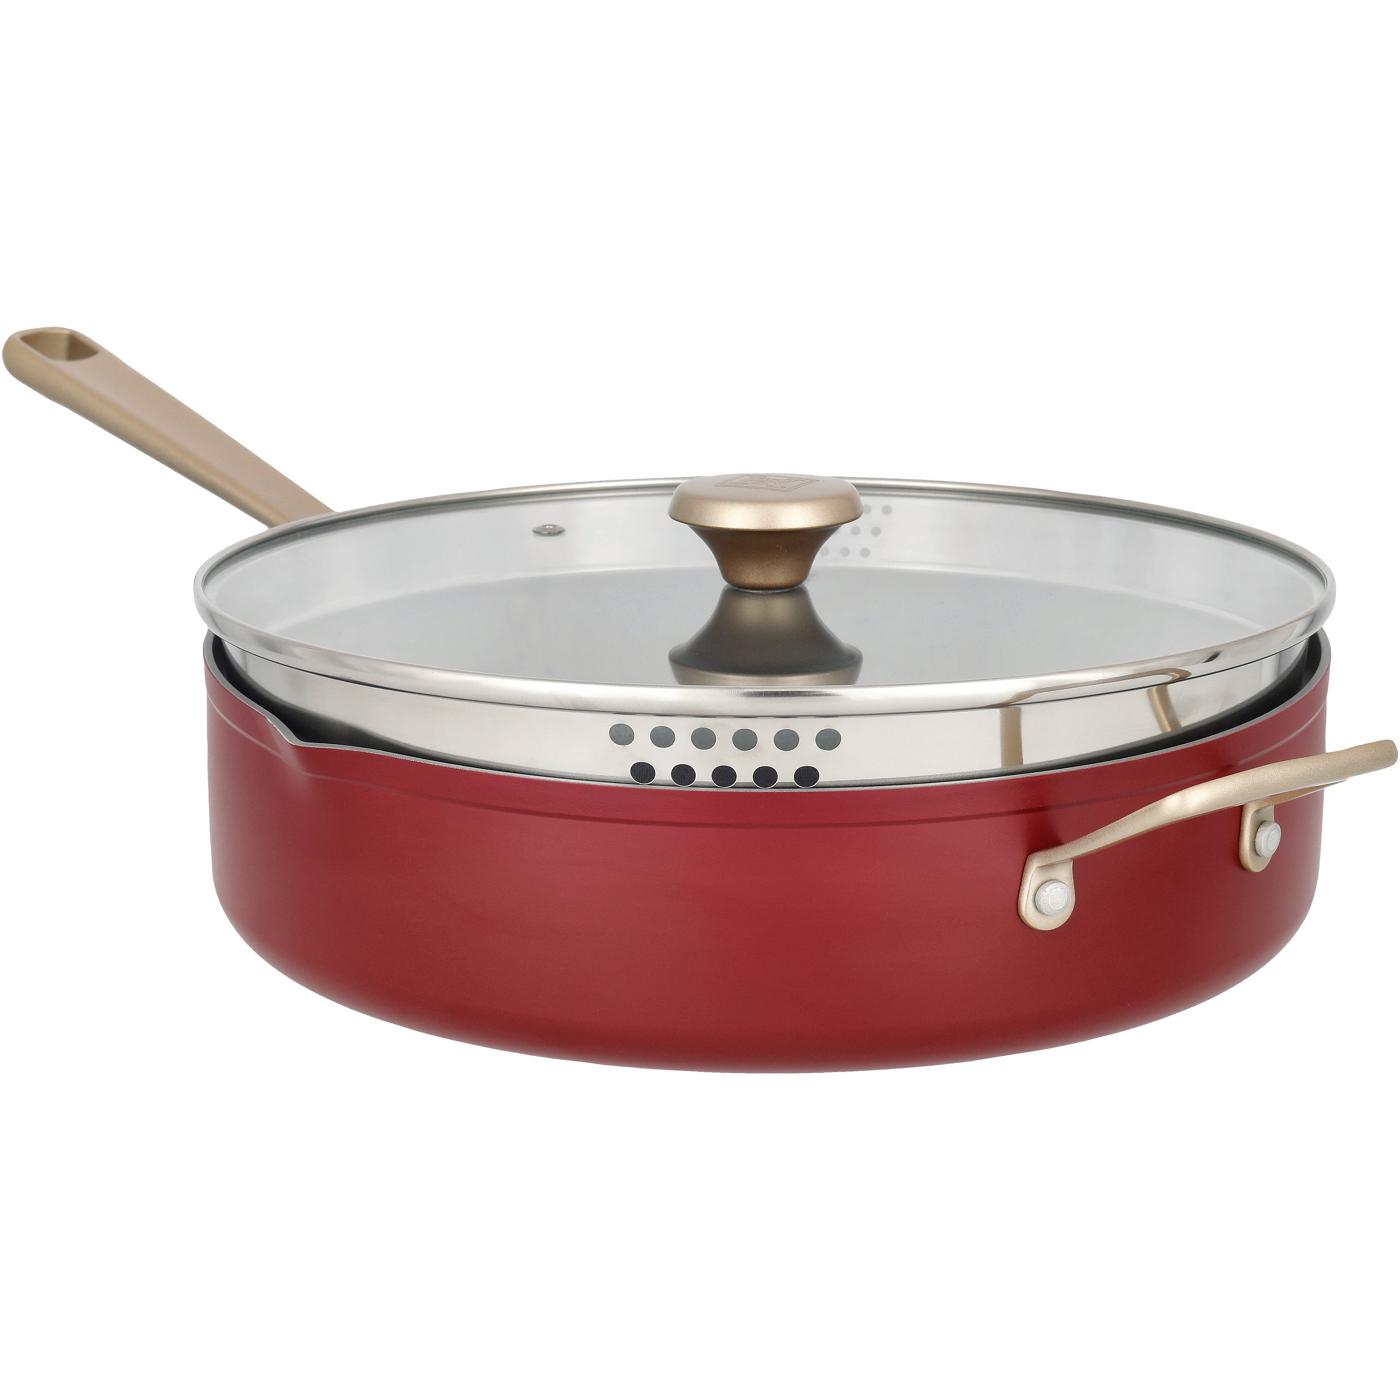 Kitchen & Table by H-E-B Non-Stick Sauté Pan with Strainer Lid - Bordeaux Red; image 3 of 7